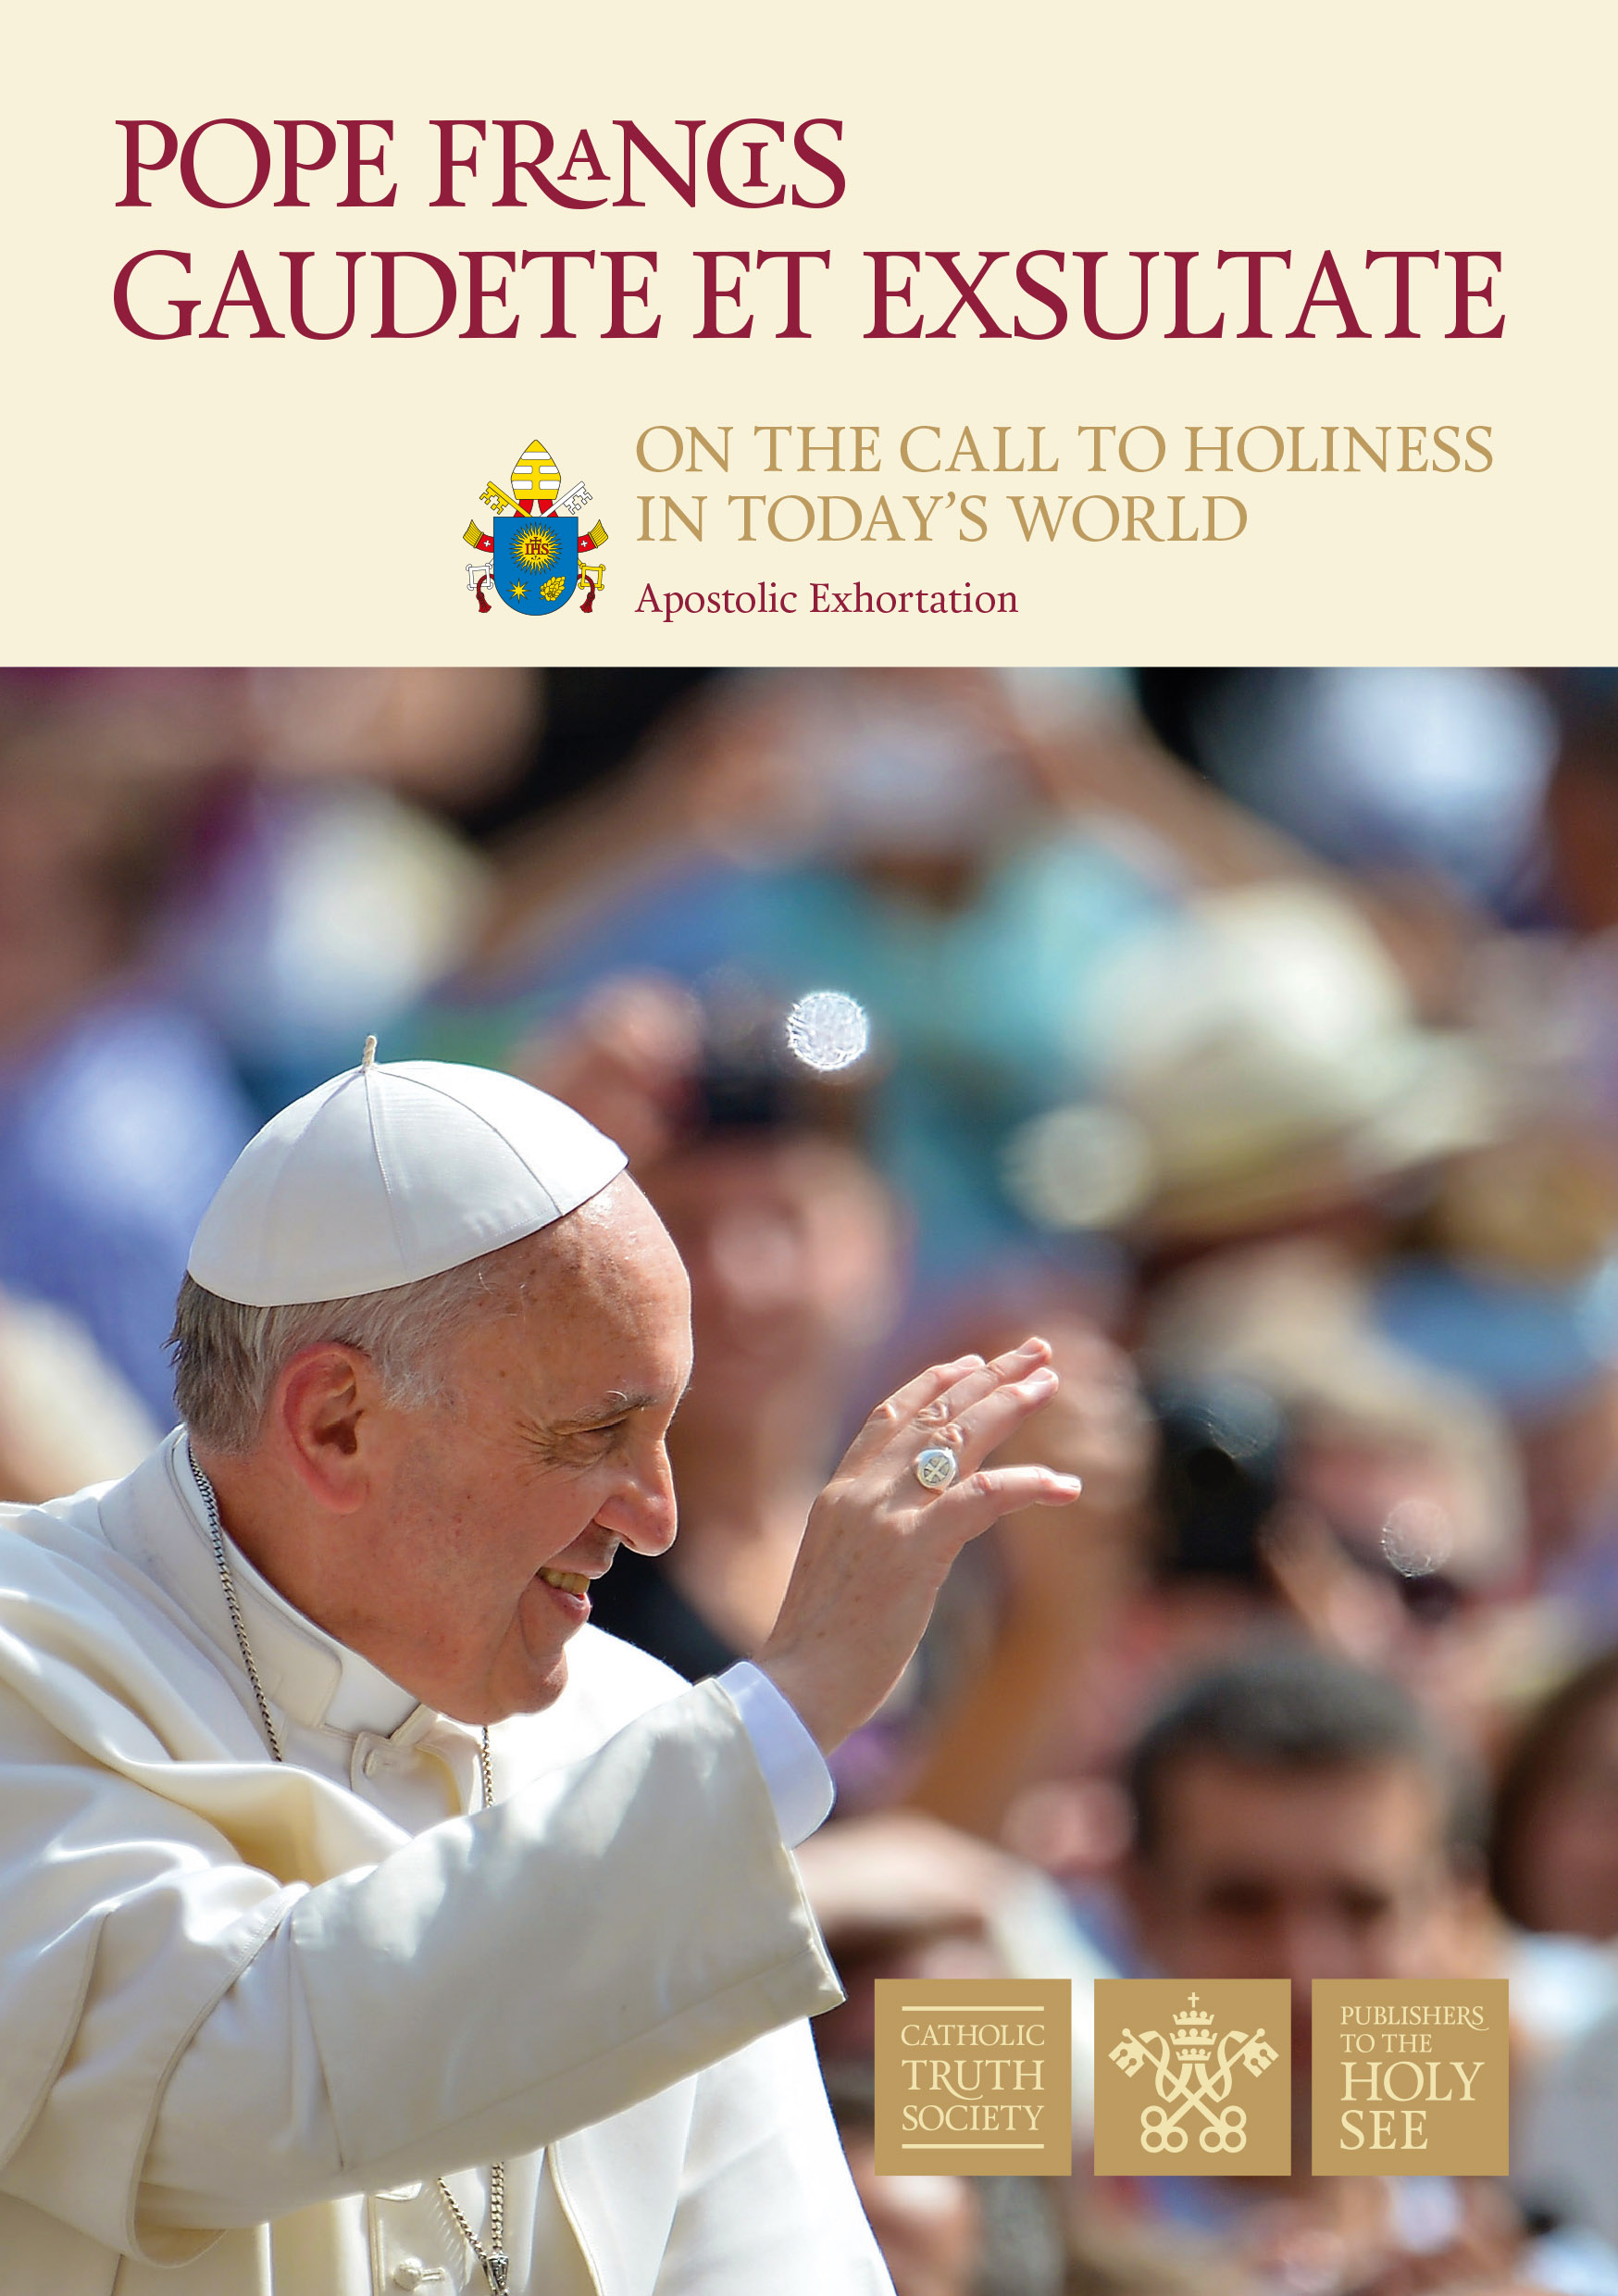 GAUDATE ET EXSULTATE: The call for holiness Is a constant battle but we can  count on powerful weapons God gave us – Archdiocese of Malta